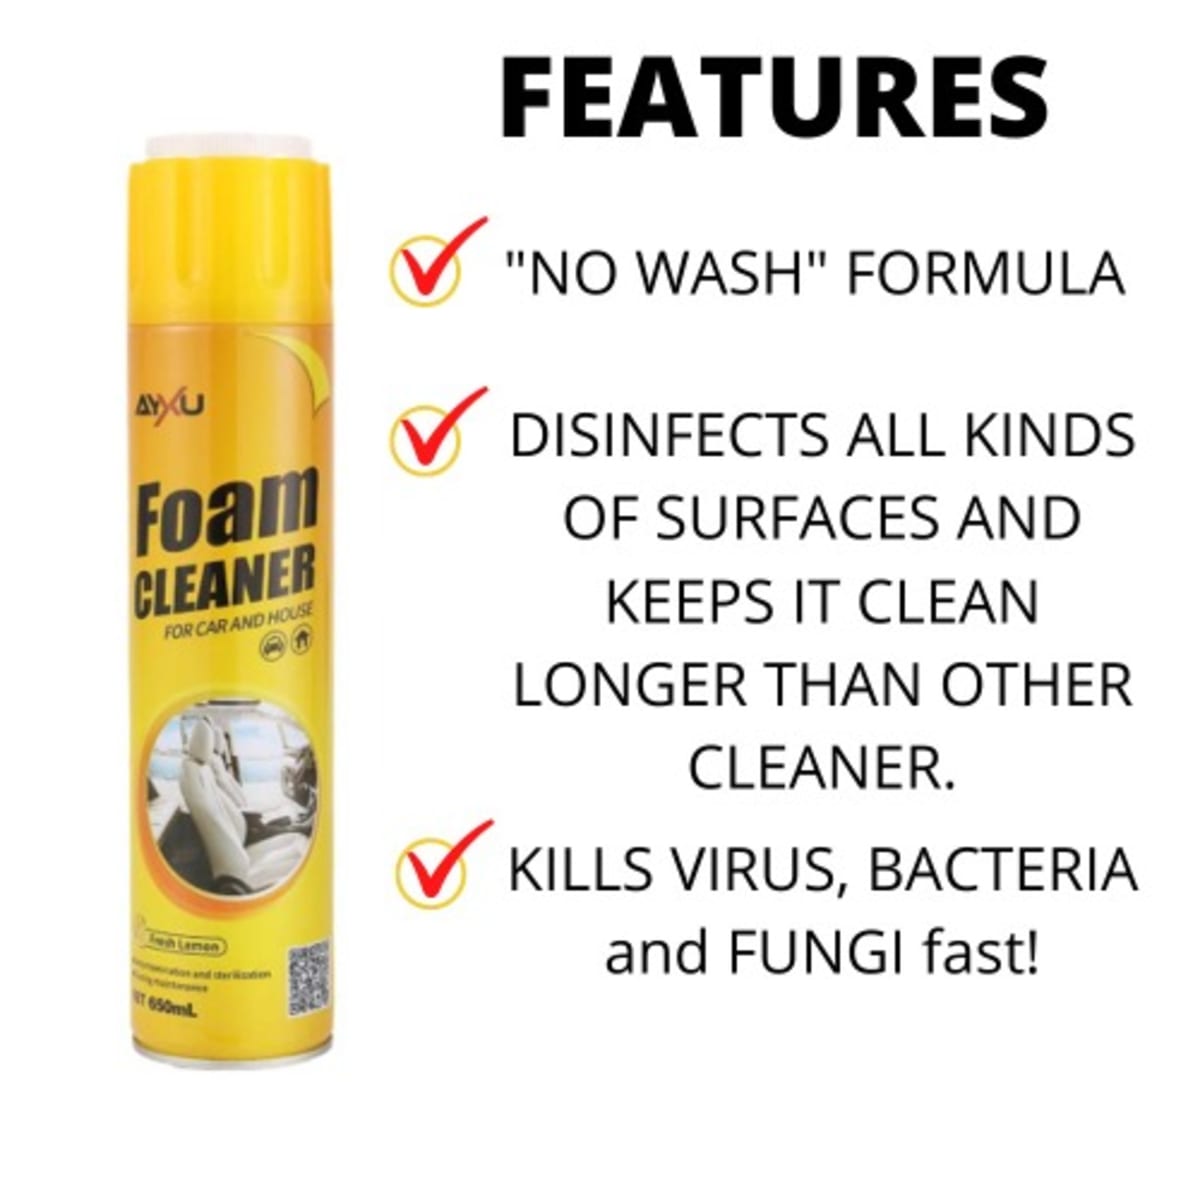 Foam Cleaner For Car And Home -650ml